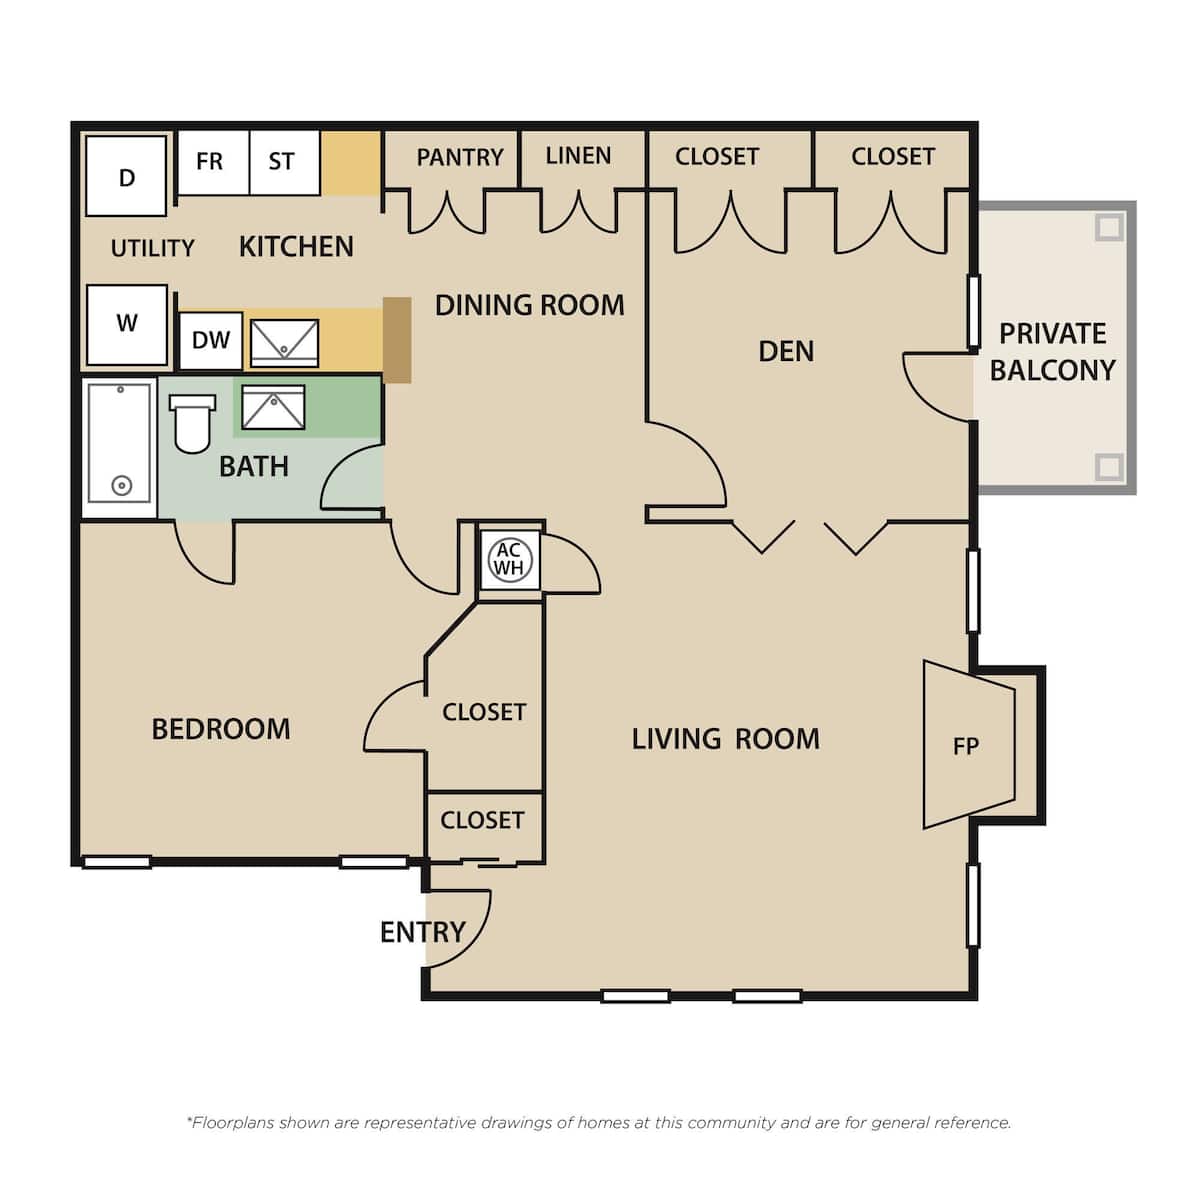 Floorplan diagram for SQUARE A8, showing 1 bedroom